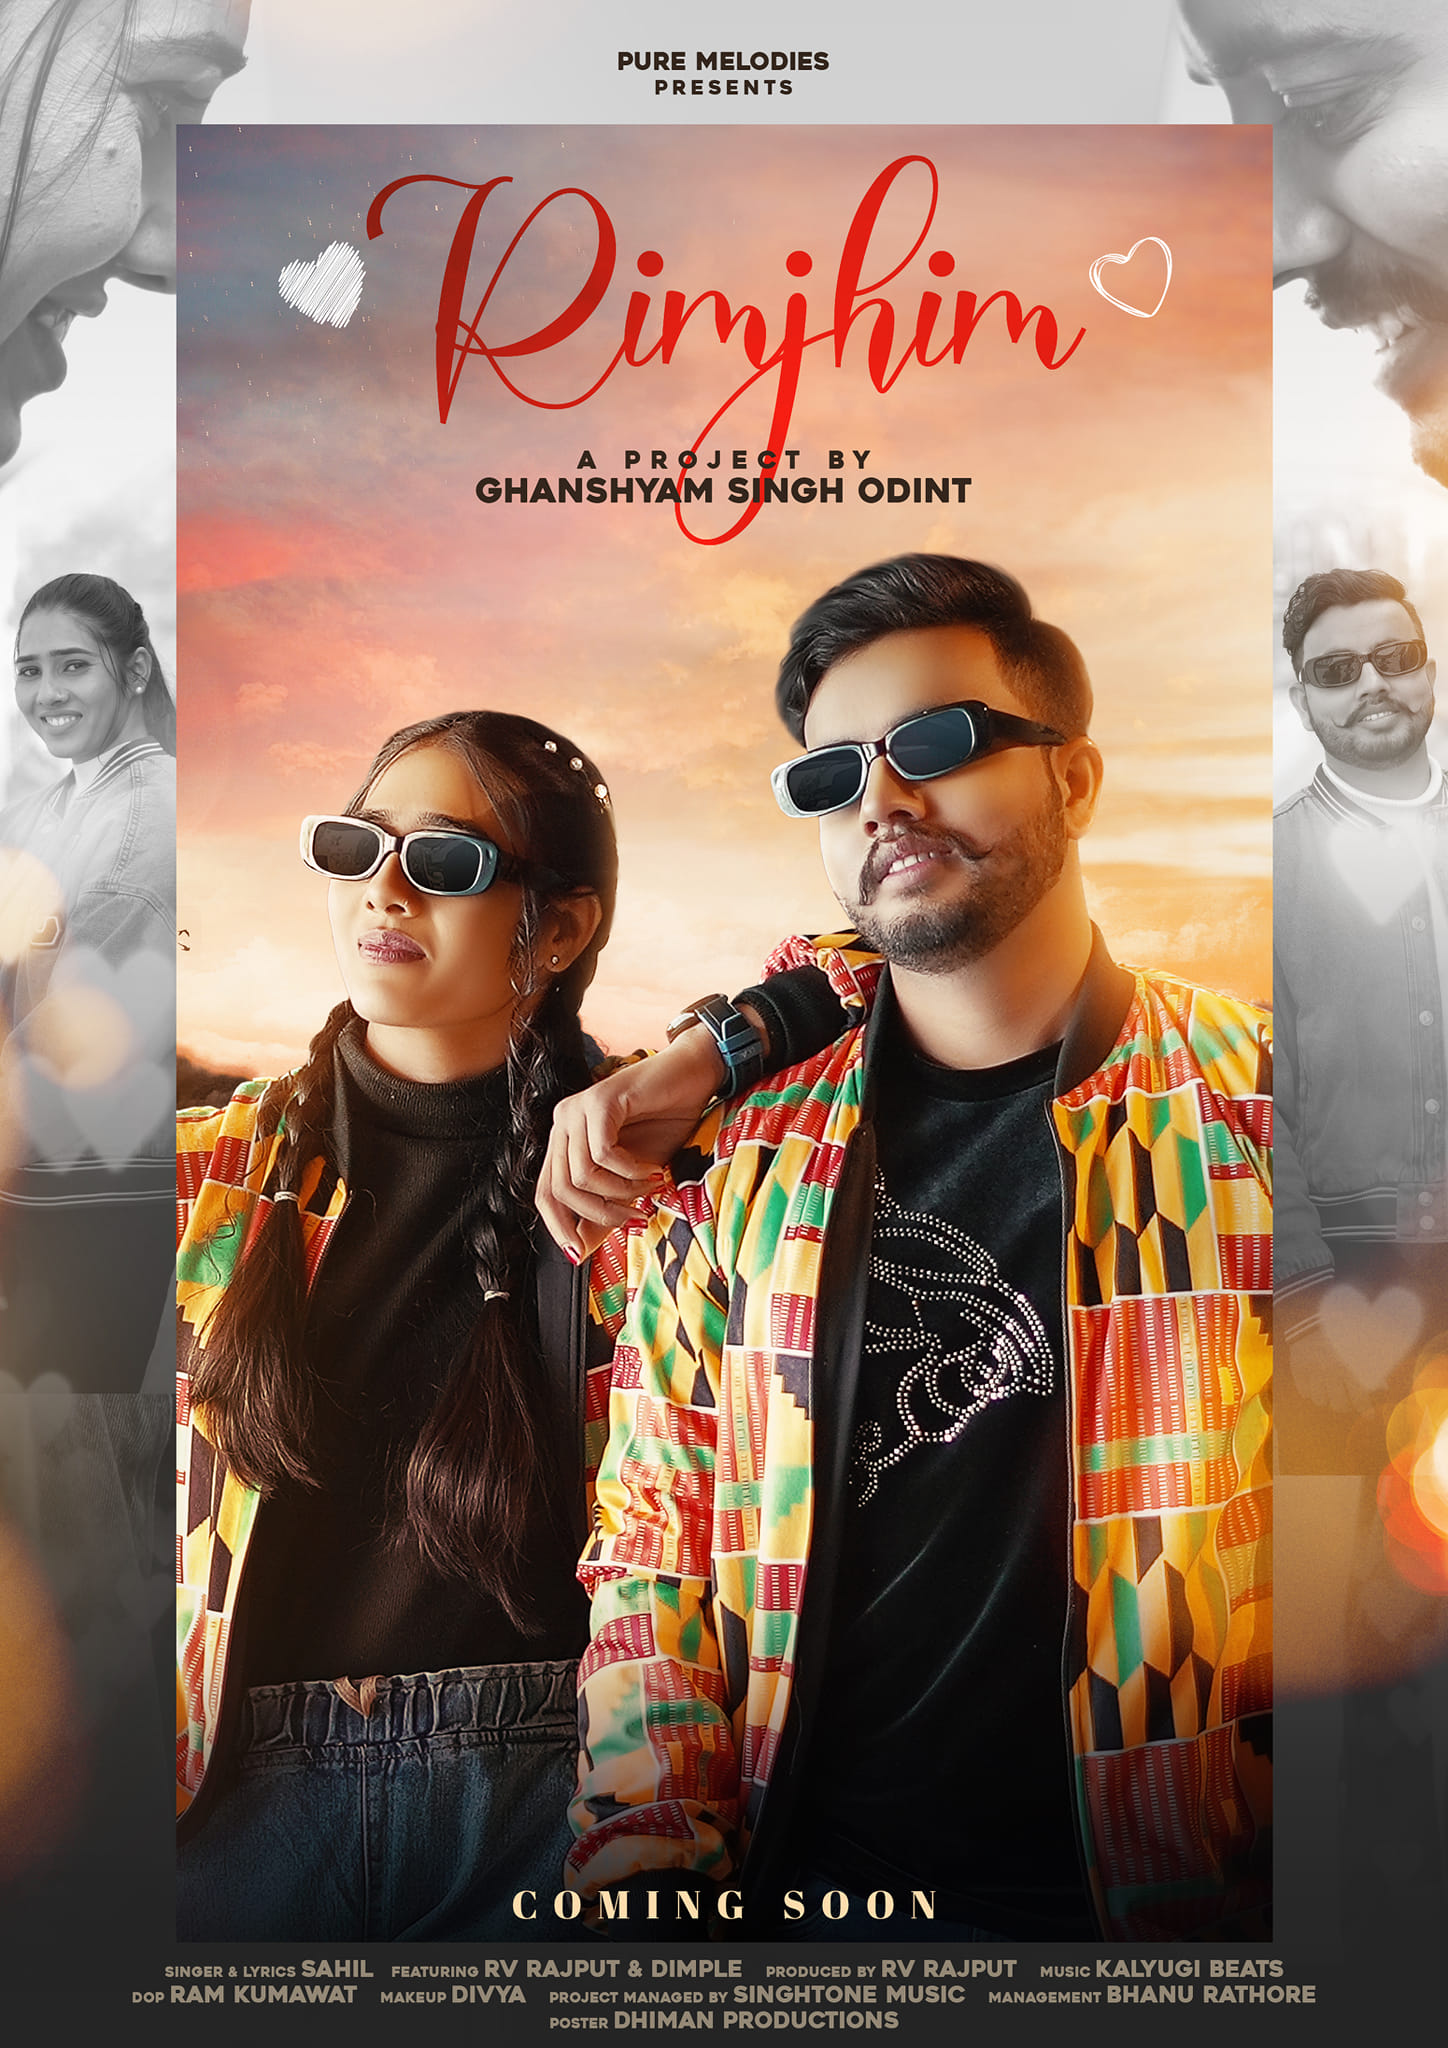 Rimjhim Rajasthani song directed by GhanShyam Singh Odint Produced by SinghTone Music